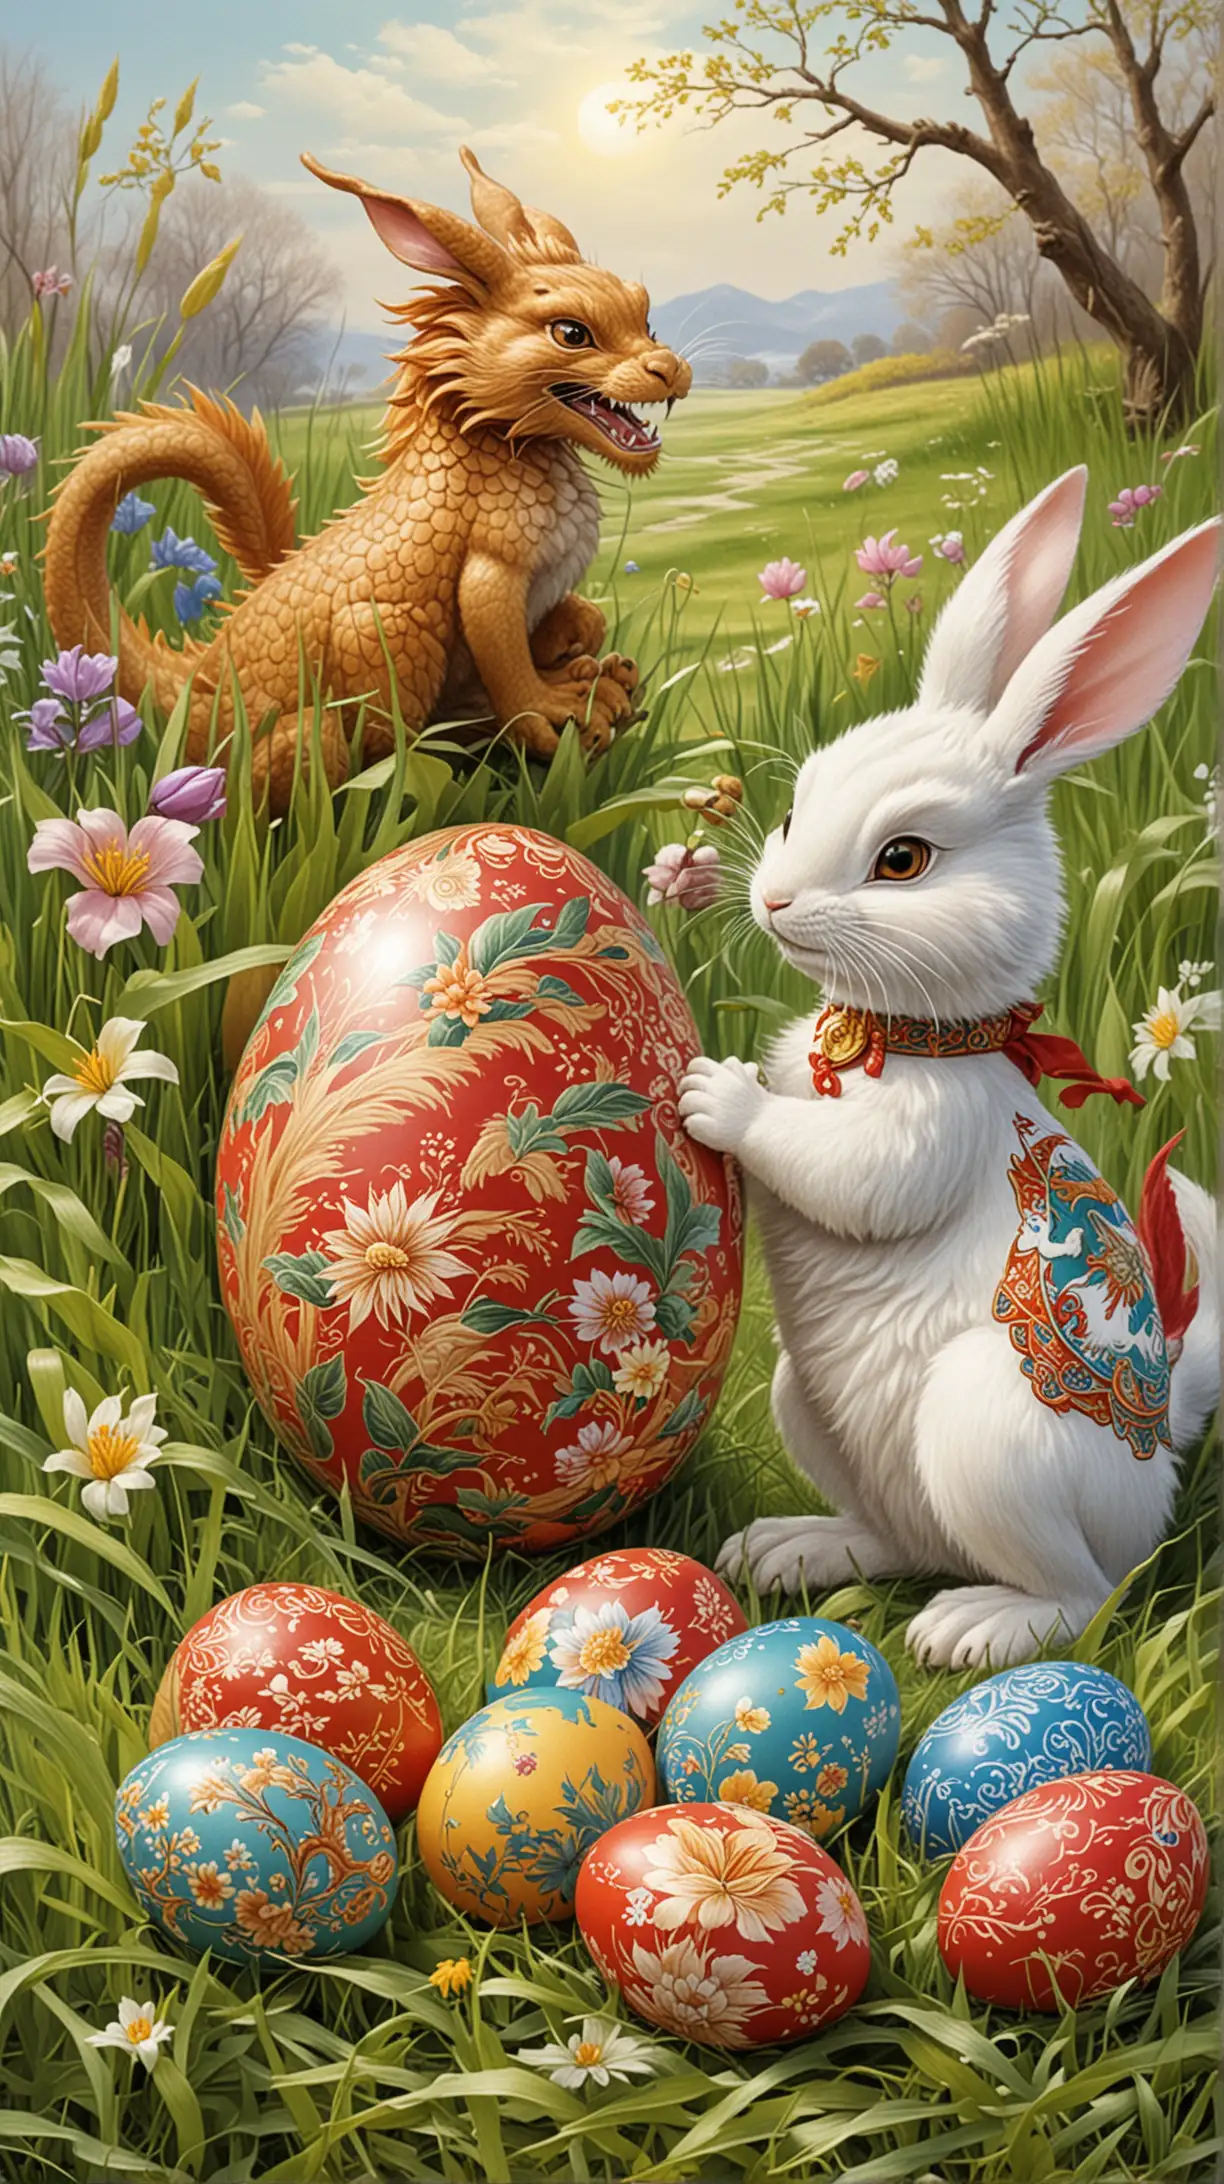 Easter greetings card, there is an Easter bunny and a Chinese dragon playing together, there are Hungarian hand painted eggs in the grass